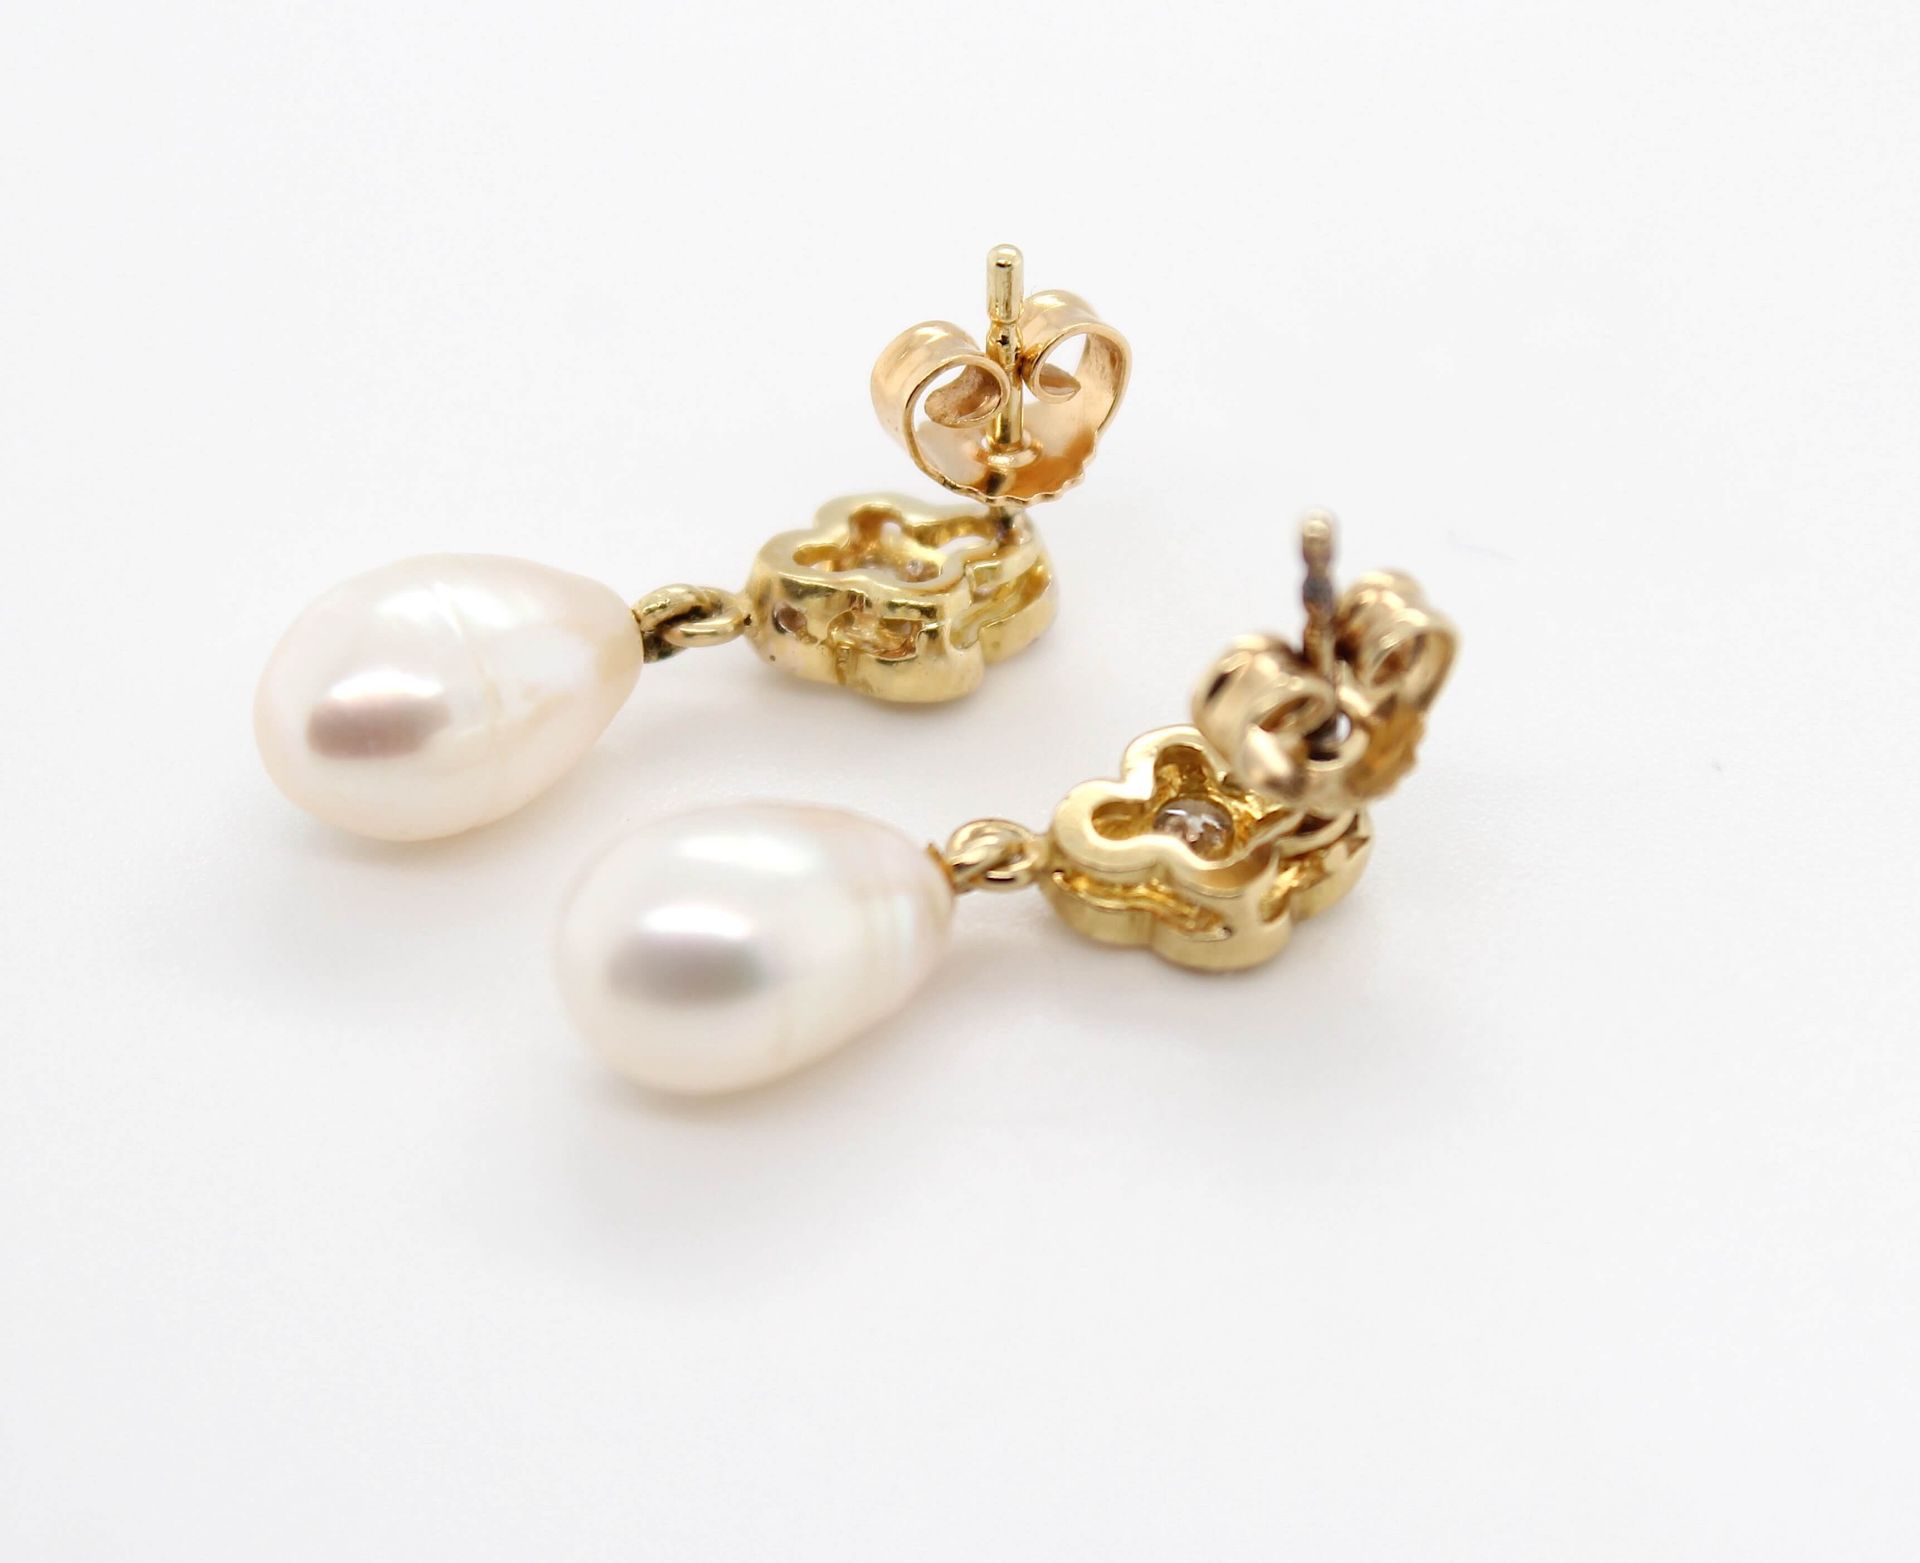 Earrings with cultured pearl and total of ca. 0.56 ct brilliants - Image 2 of 2